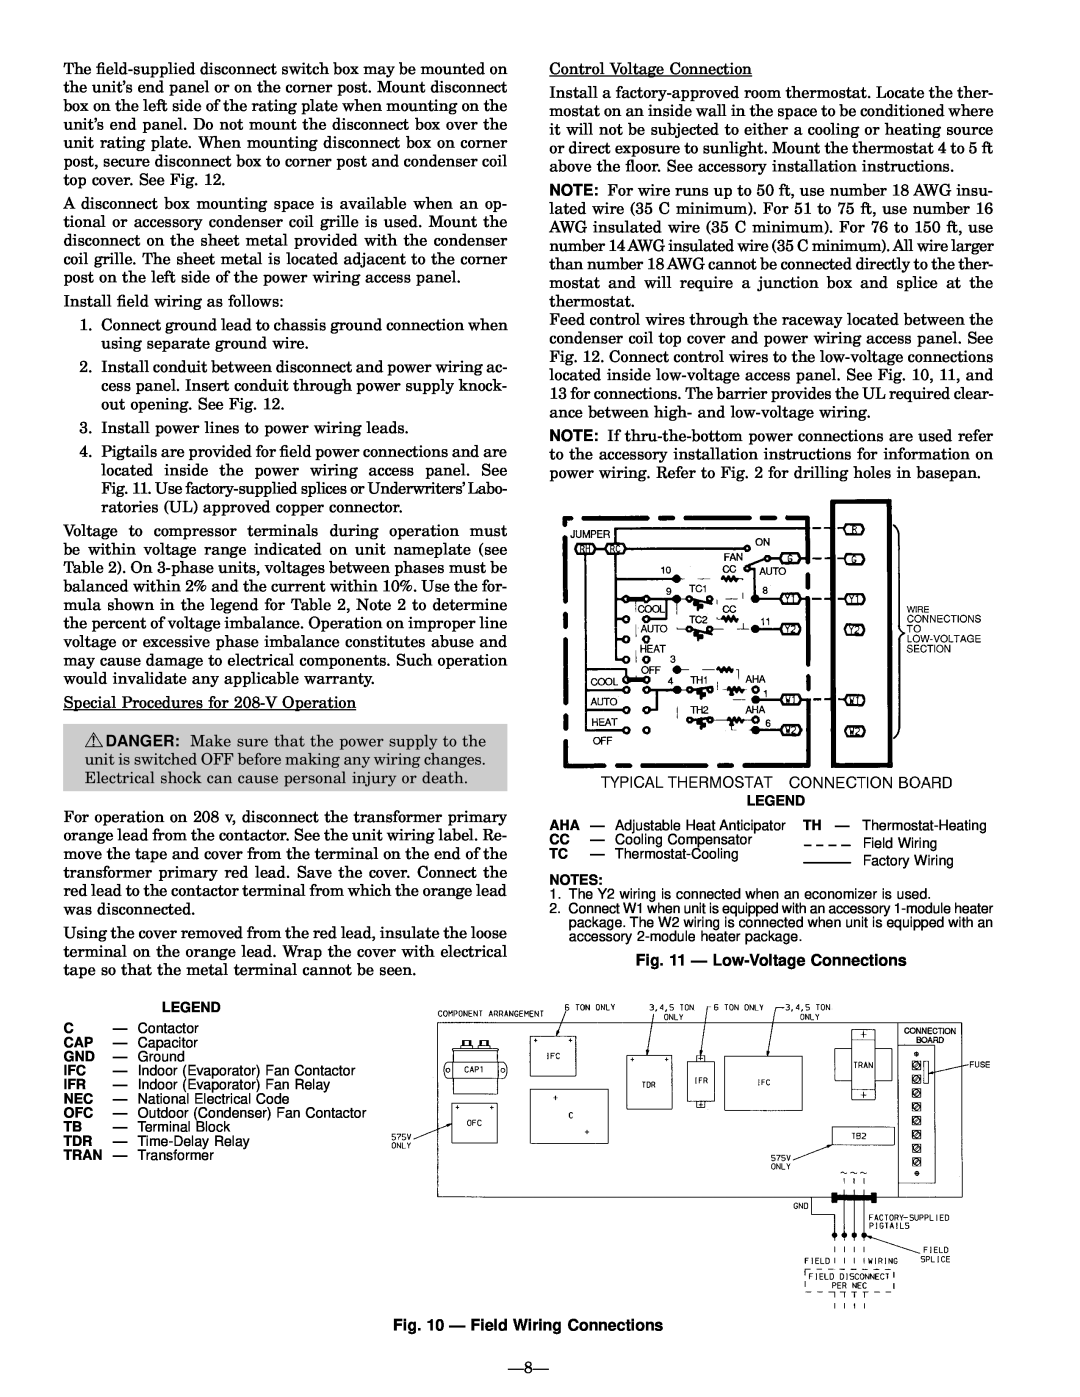 Bryant 558D installation instructions Ð Low-VoltageConnections, Ð Field Wiring Connections 